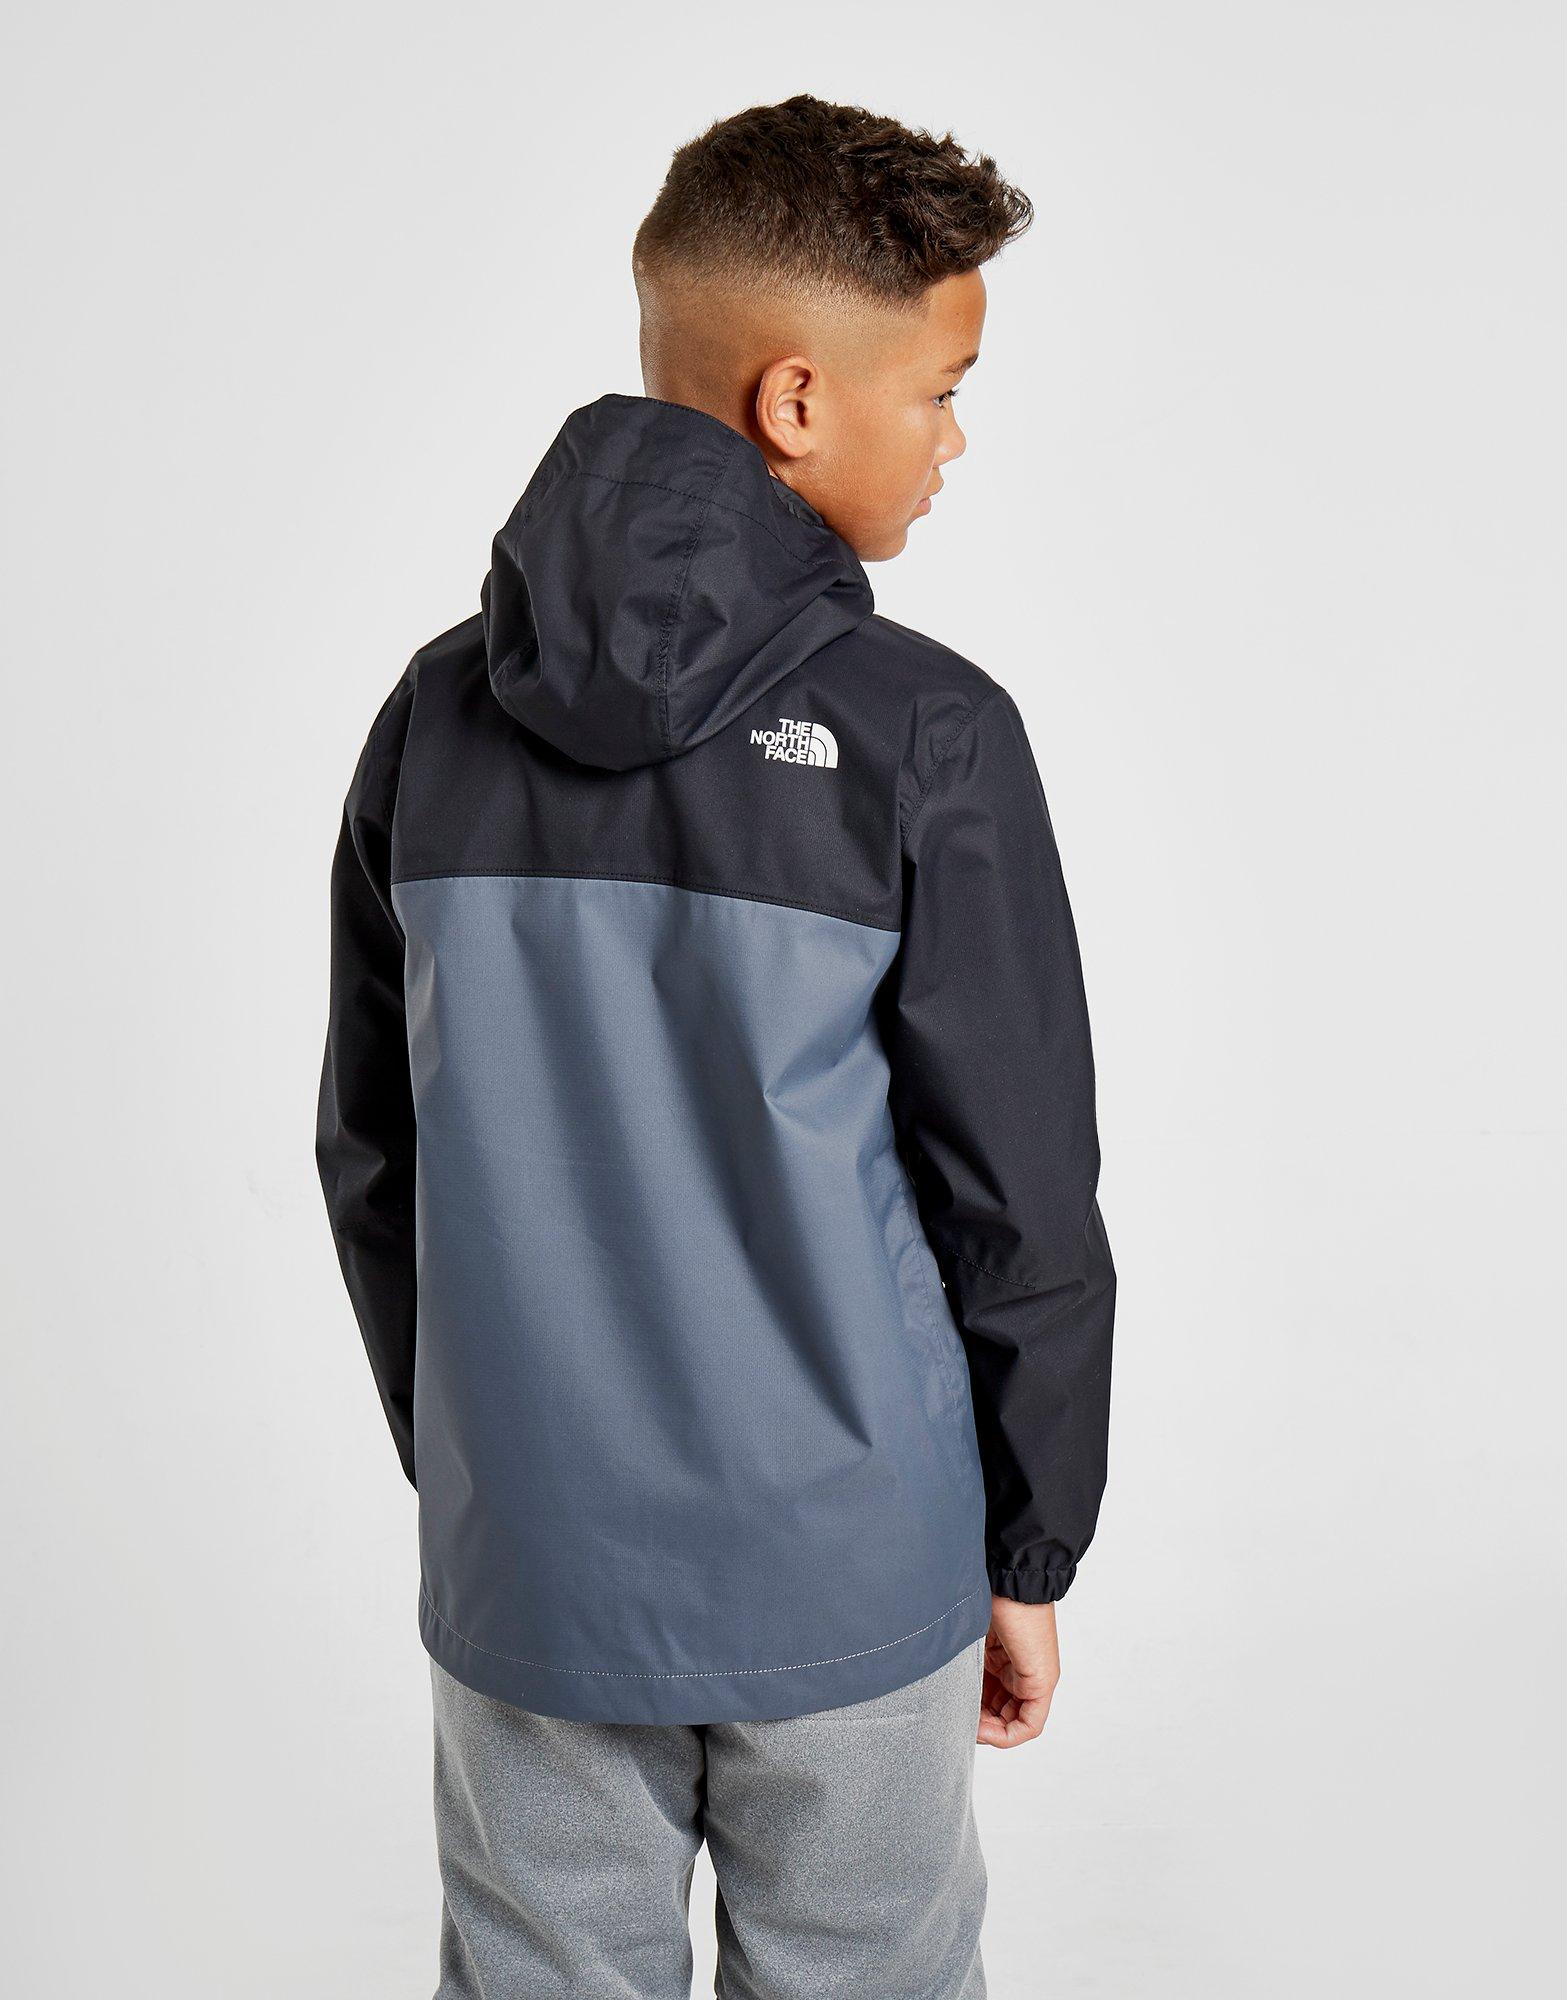 the north face junior resolve jacket